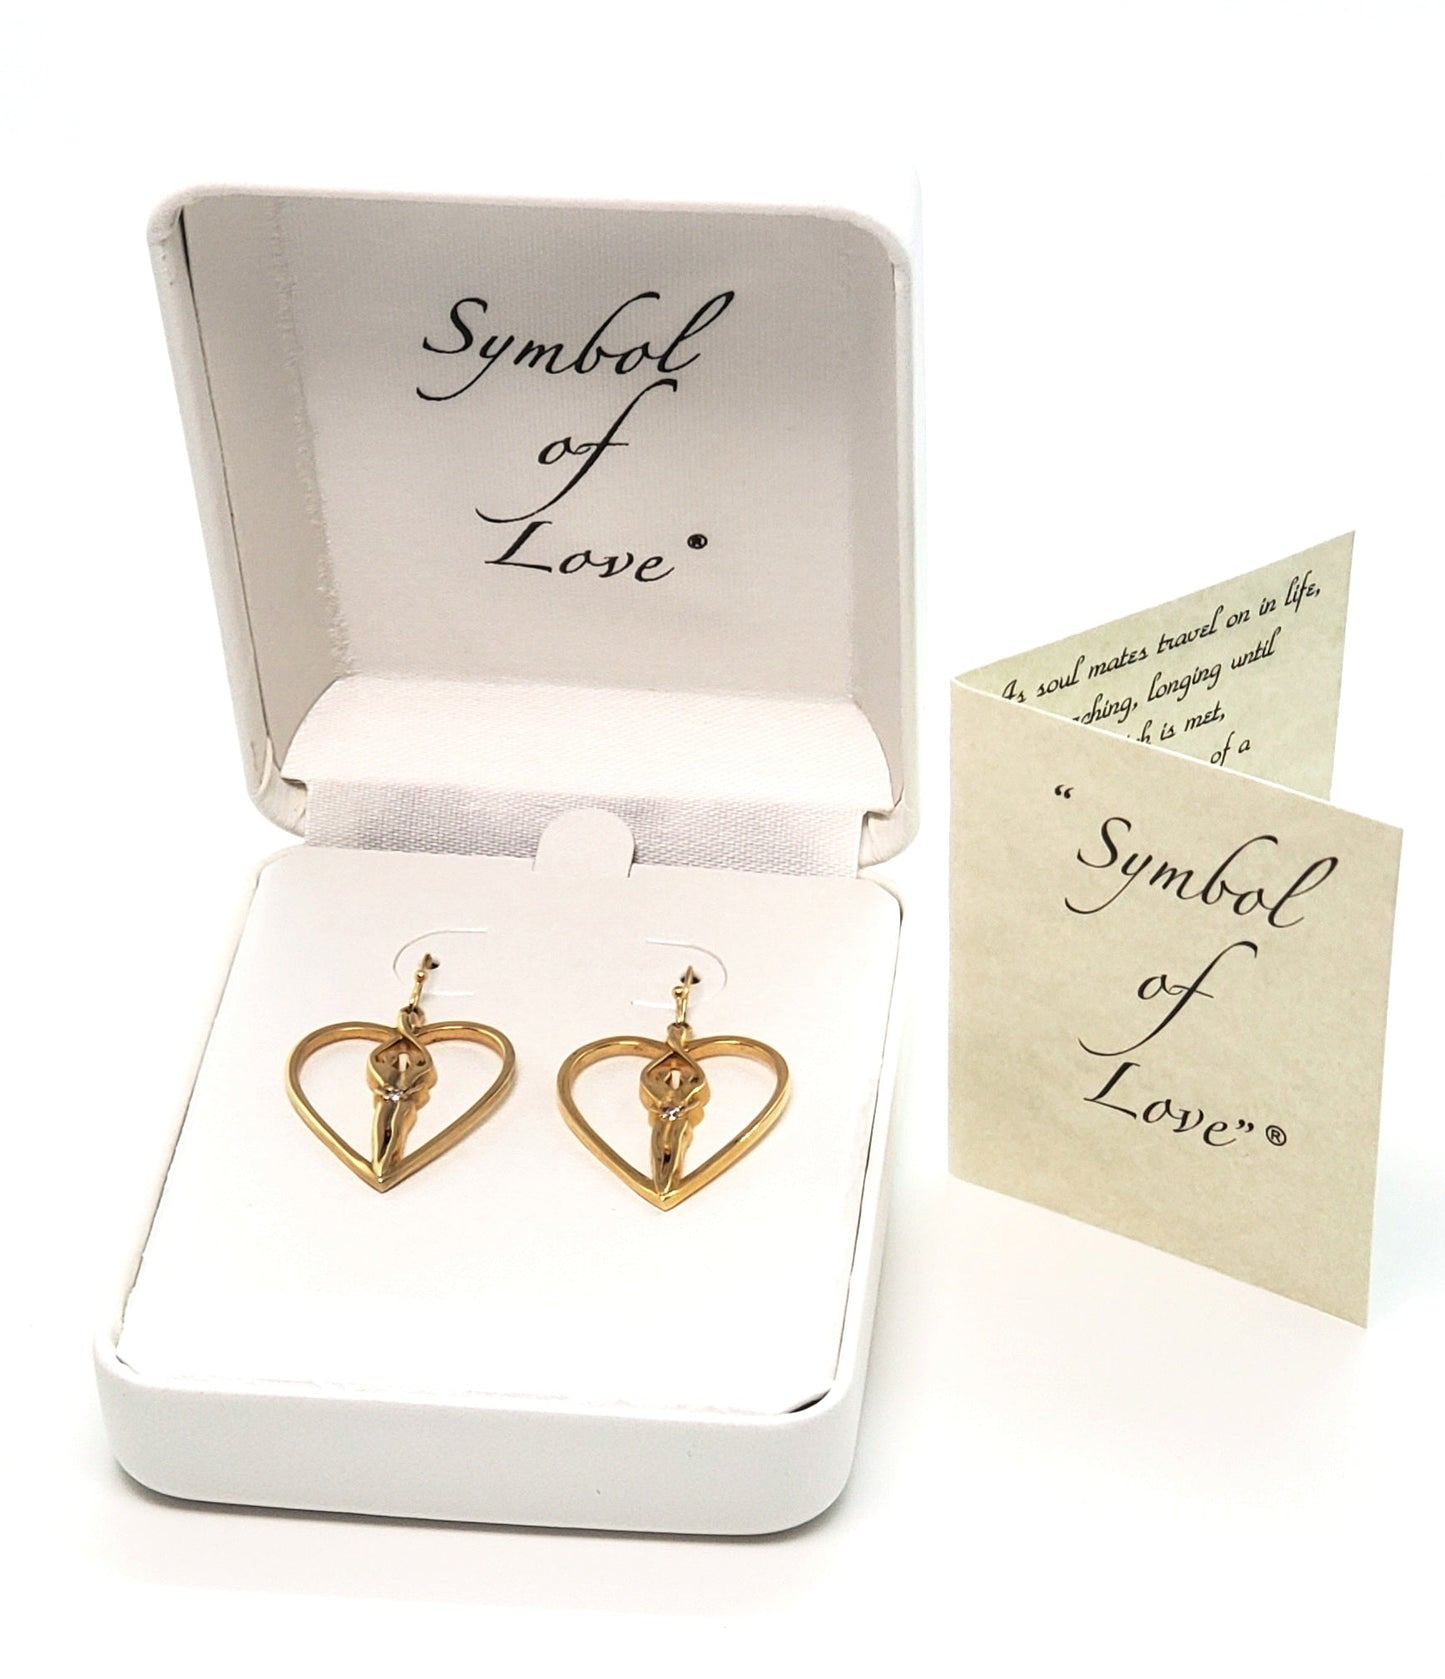 Soulmate Heart Earrings, 1" by ¾", .925 Genuine Sterling Silver with 14kt. Gold Overlay, Ear Wire, Emerald Cubic Zirconia